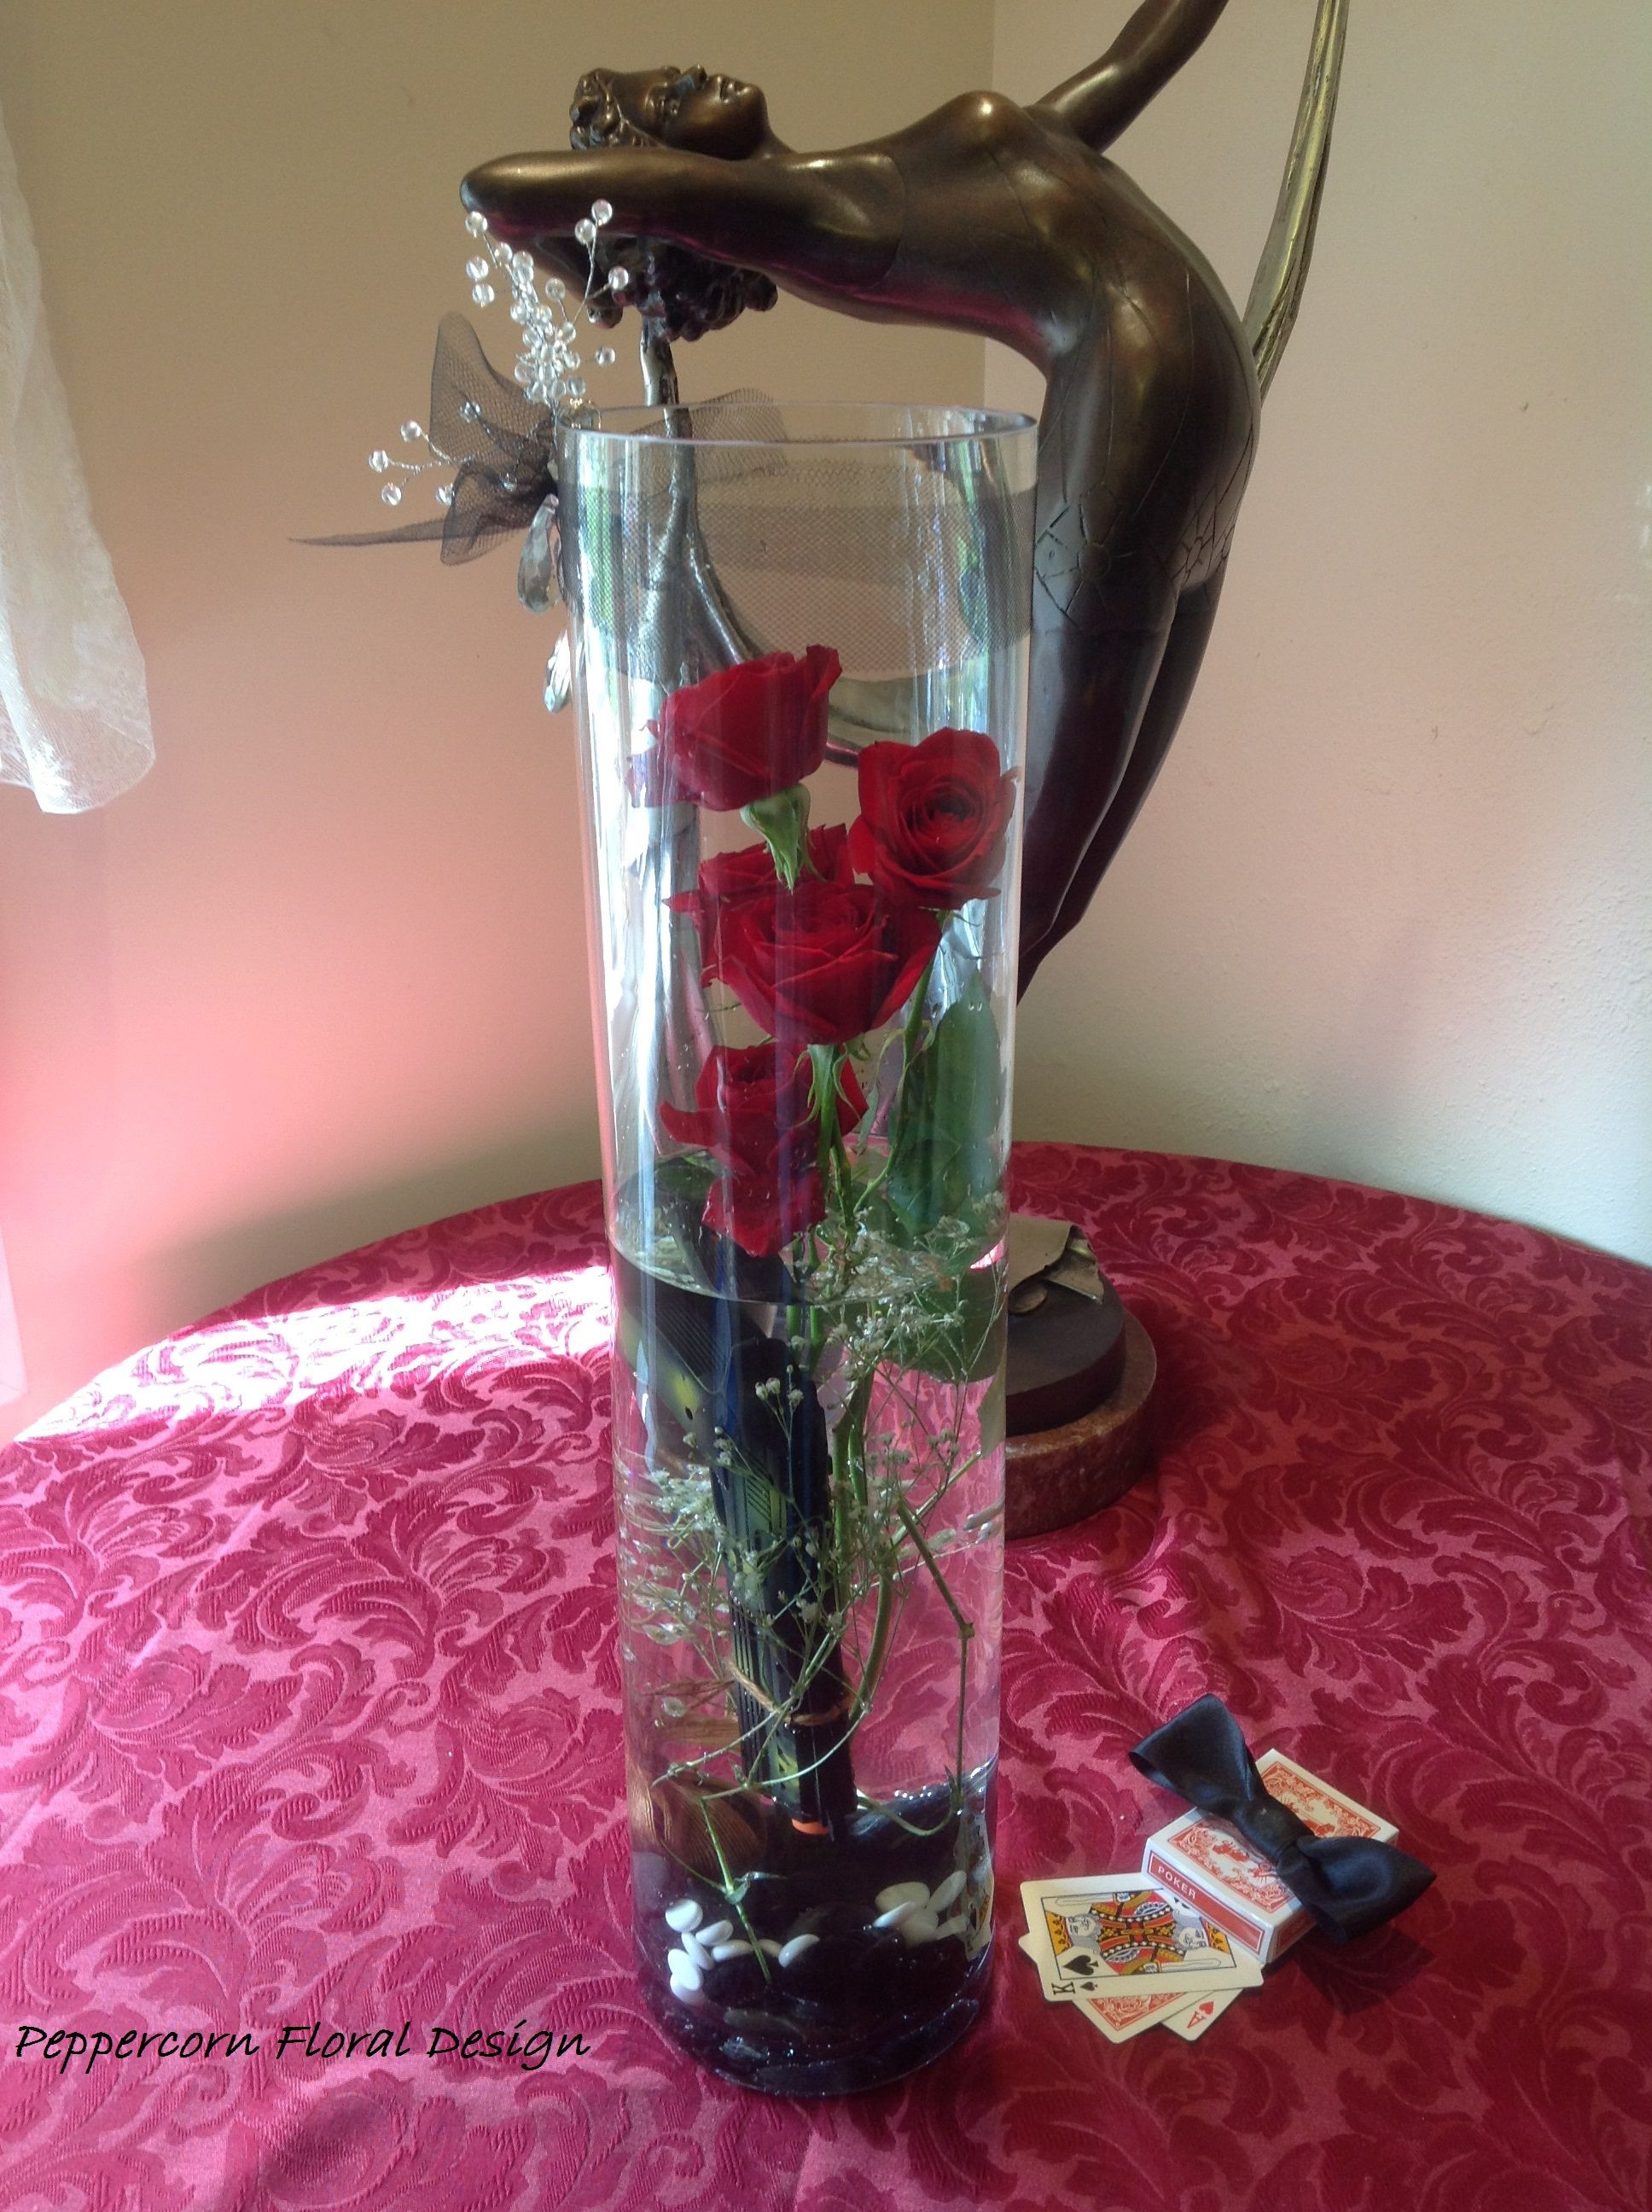 white cylinder vase of art deco lady bronze statue with glass cylinder vase flower intended for art deco lady bronze statue with glass cylinder vase flower arrangement for red black and white gangster theme murder mystery party add cards and bow tie